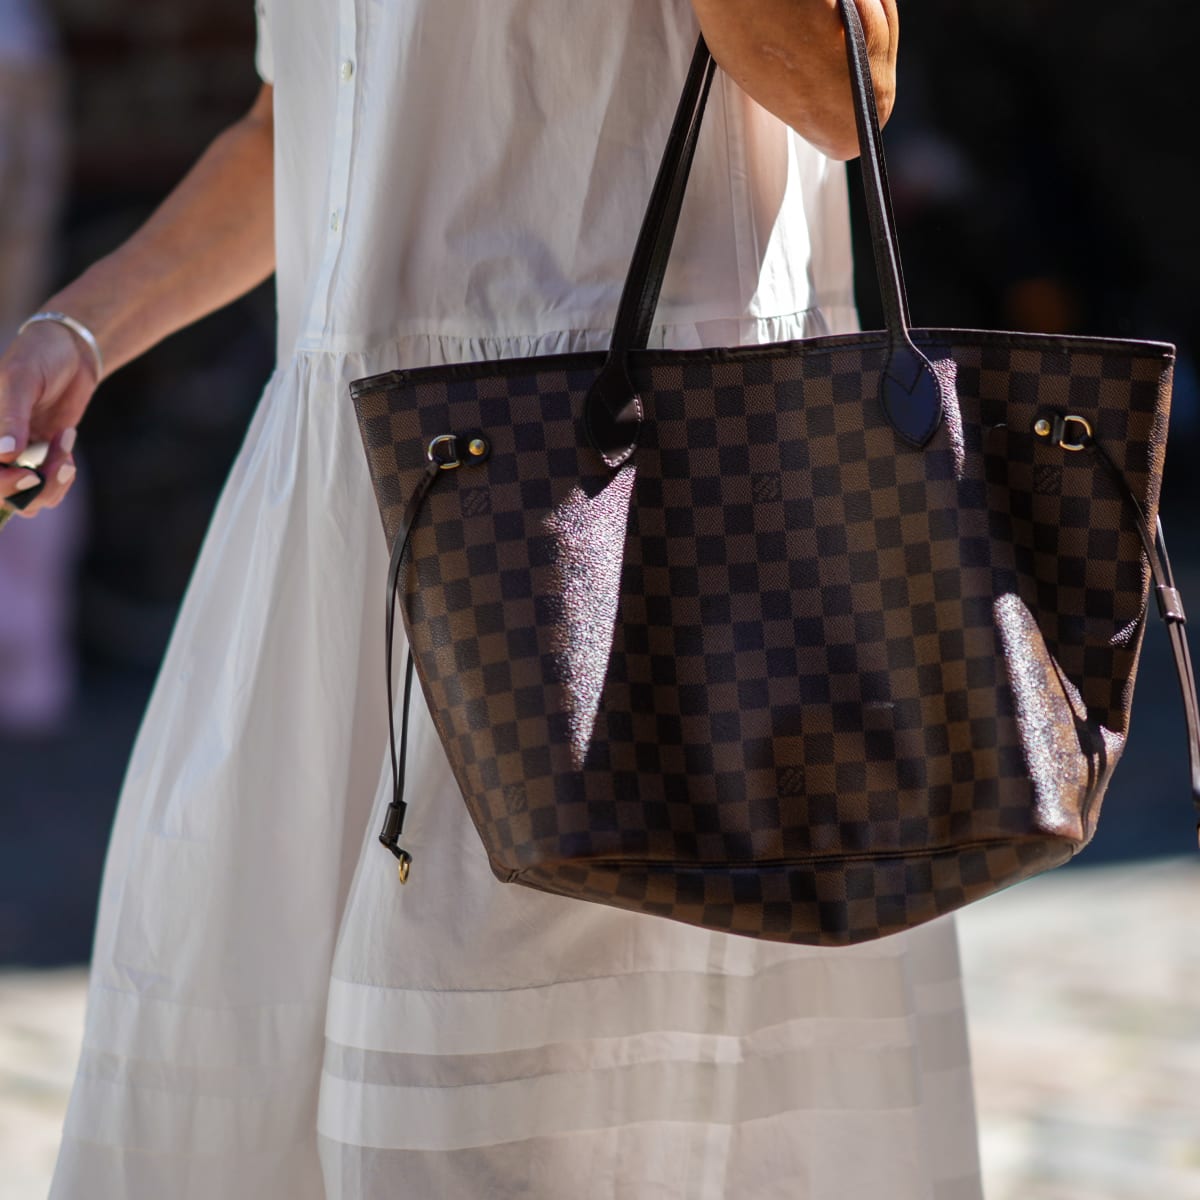 These are the luxury handbags that fetch the highest value when resold -  HIGHXTAR.